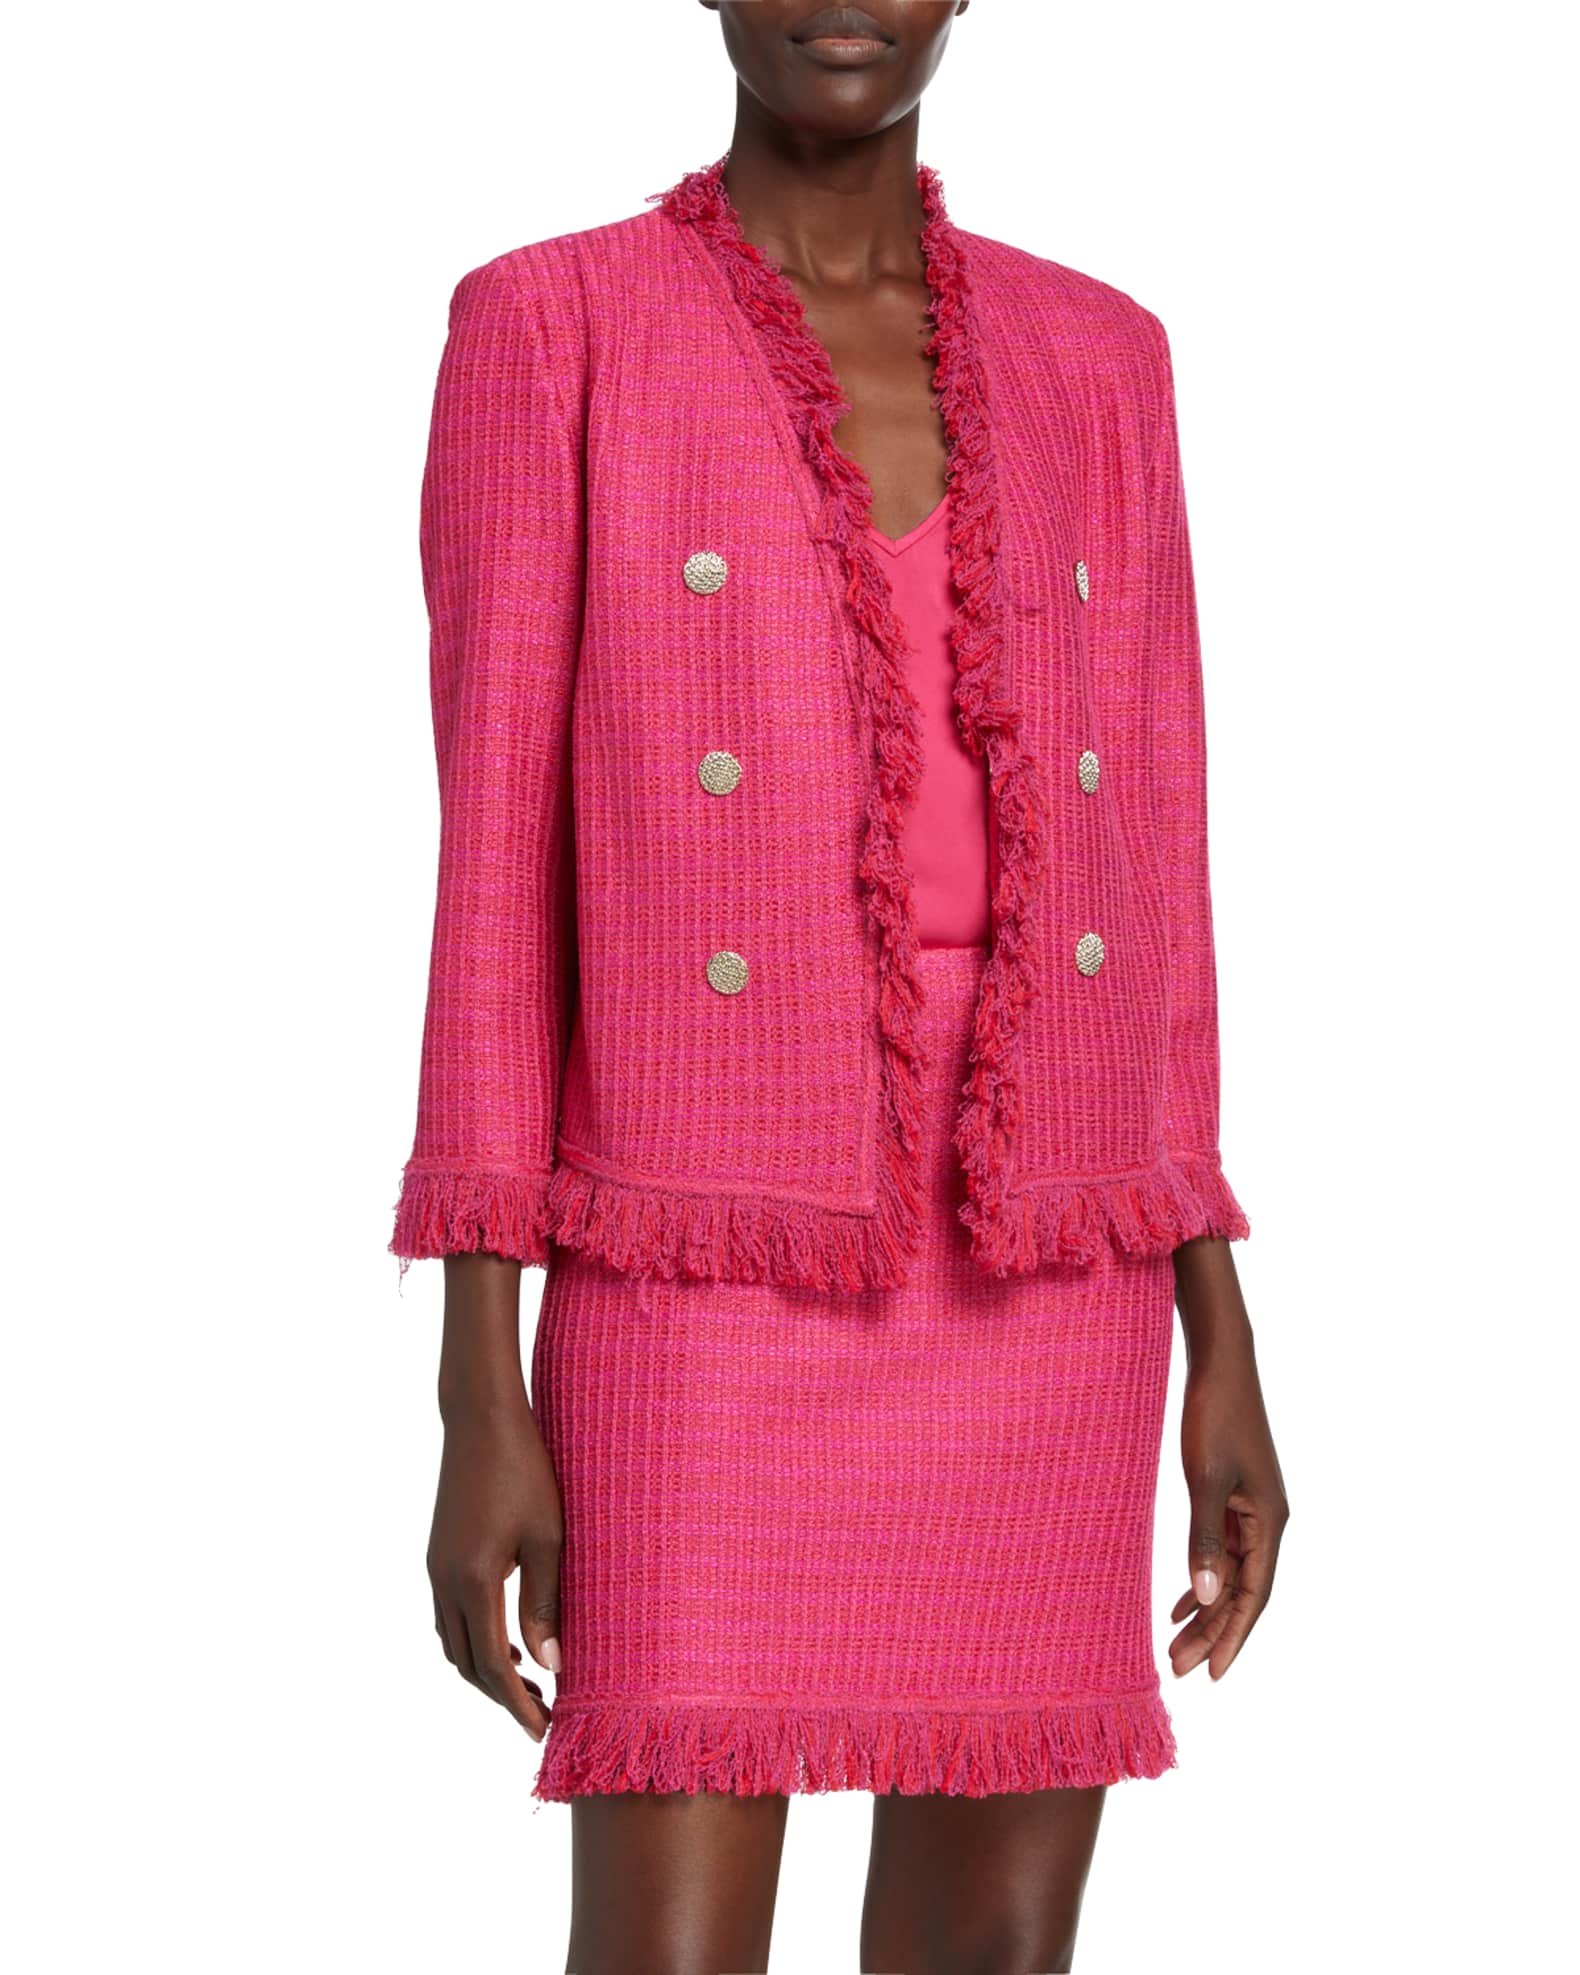 Poppy Textured 3/4-Sleeve Jacket and Matching Items | Neiman Marcus